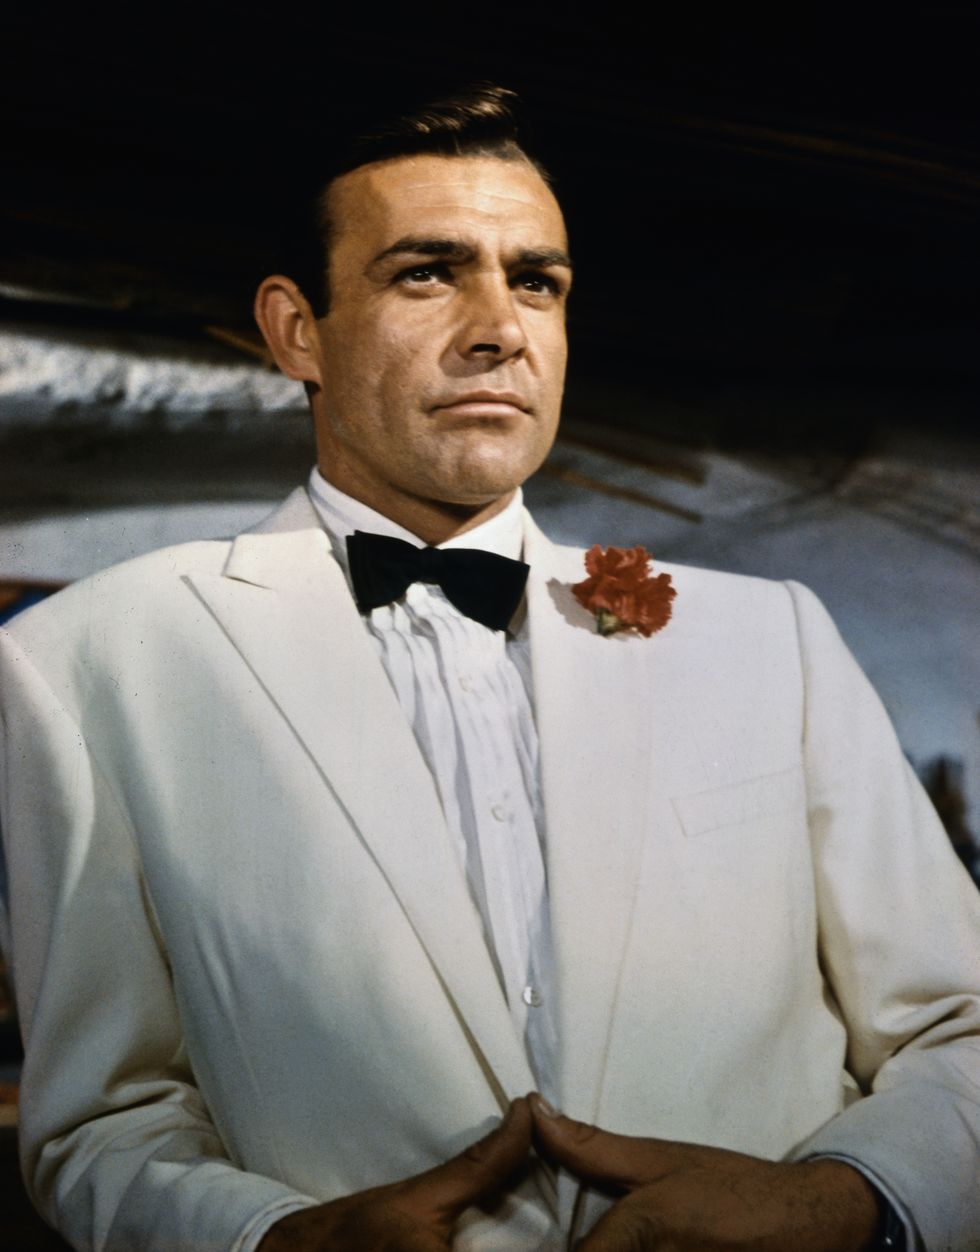 sean connery as secret agent 007, james bond, in the movie goldfinger